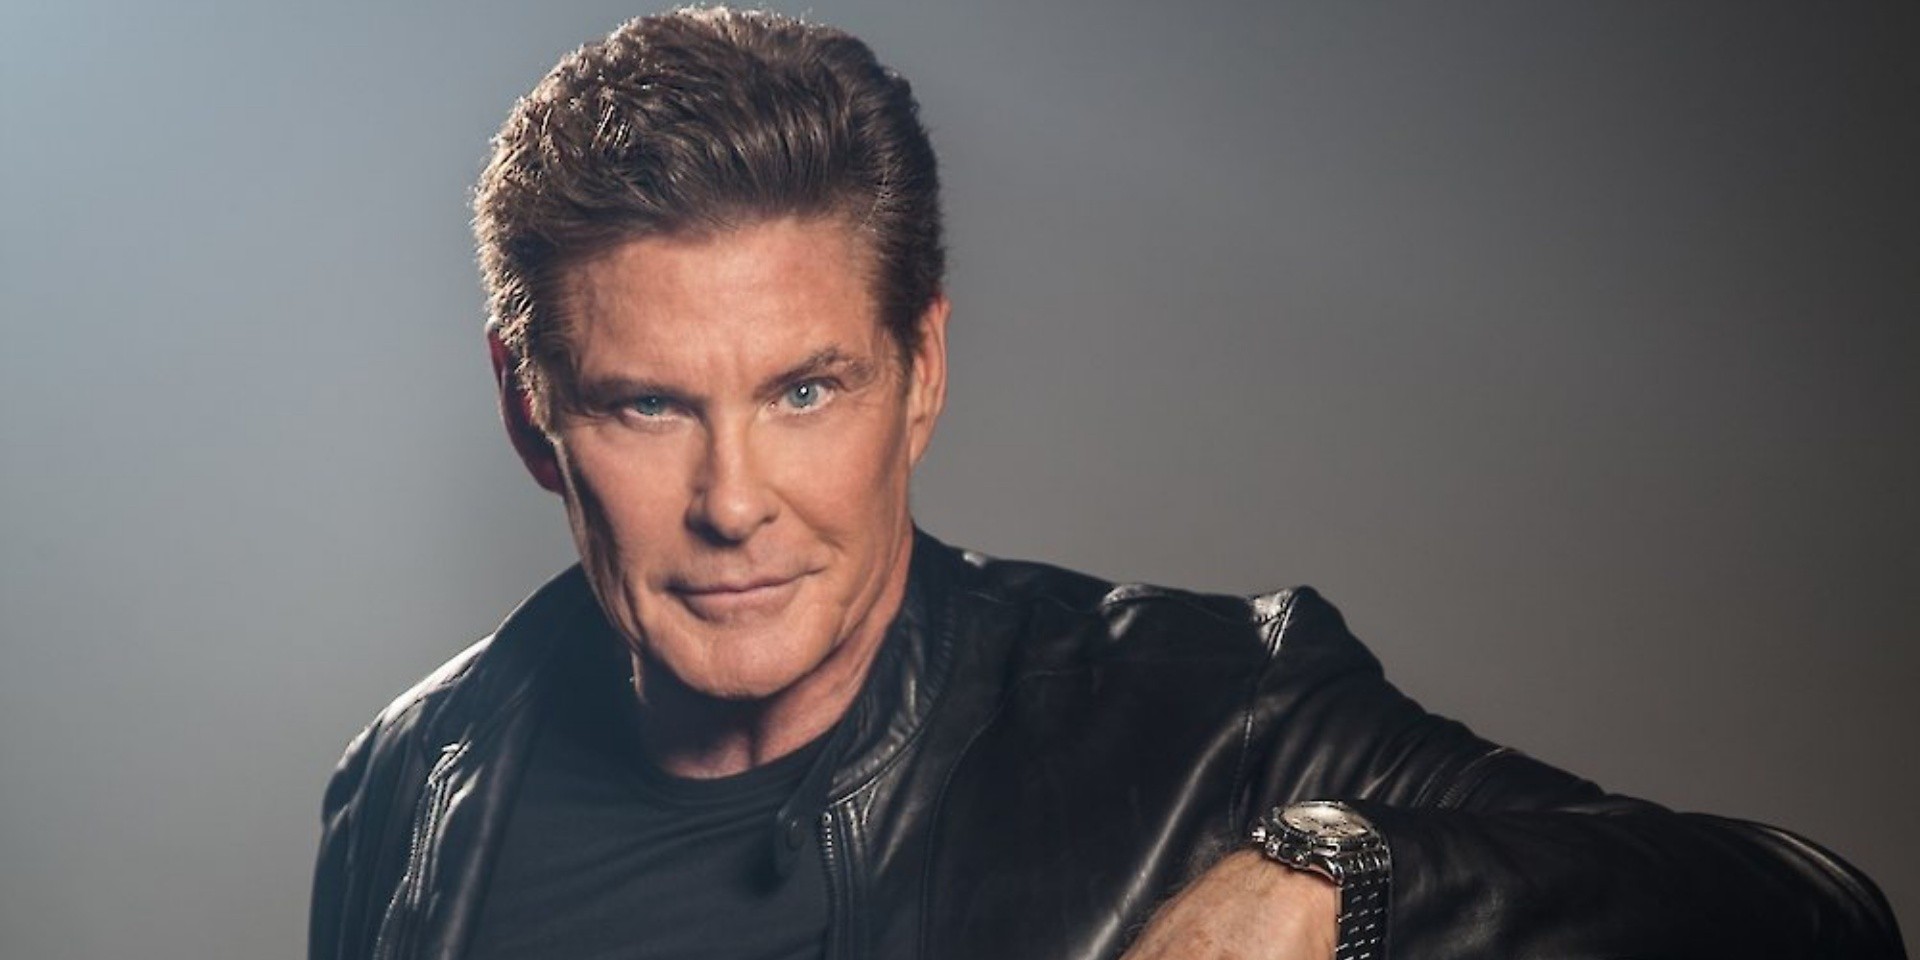 David Hasselhoff to record "heavy metal" songs for new album